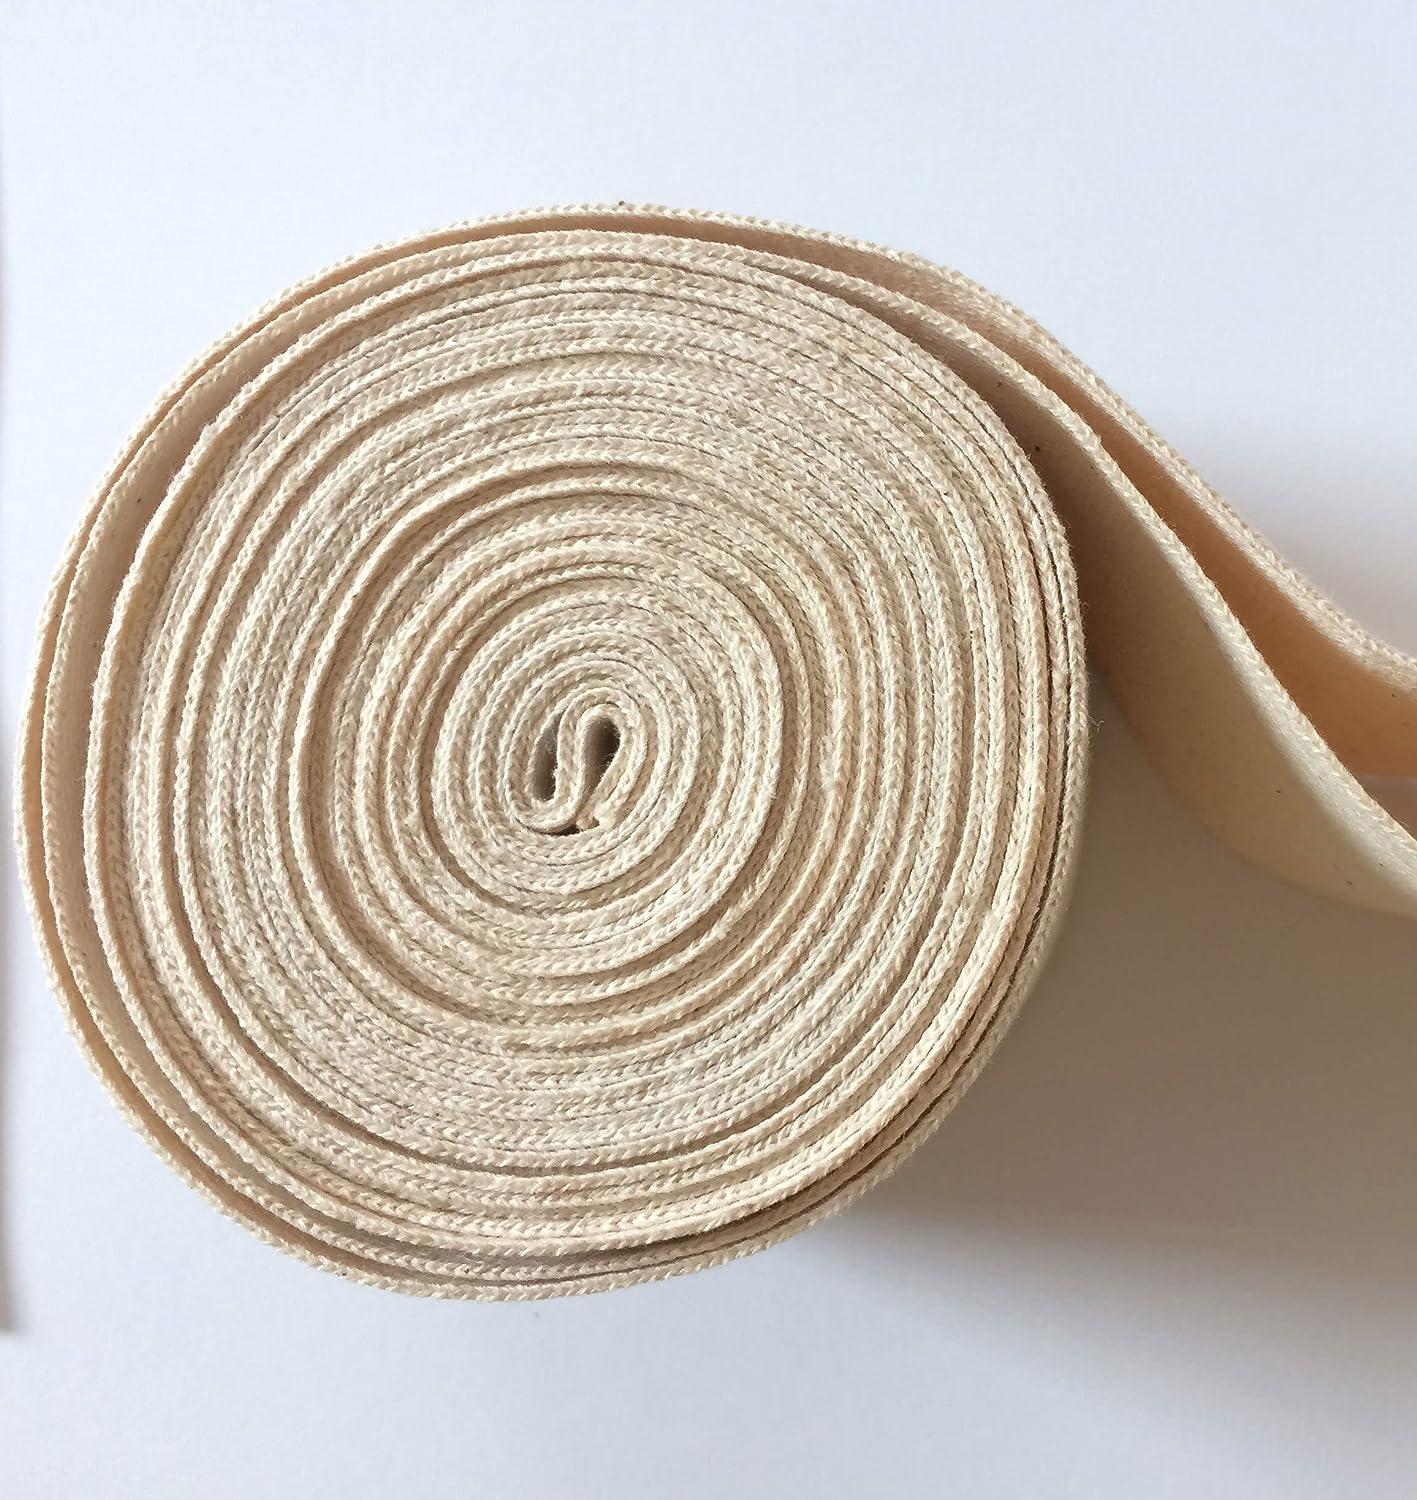 Natural 1 Inch Heavy Cotton Twill Tape